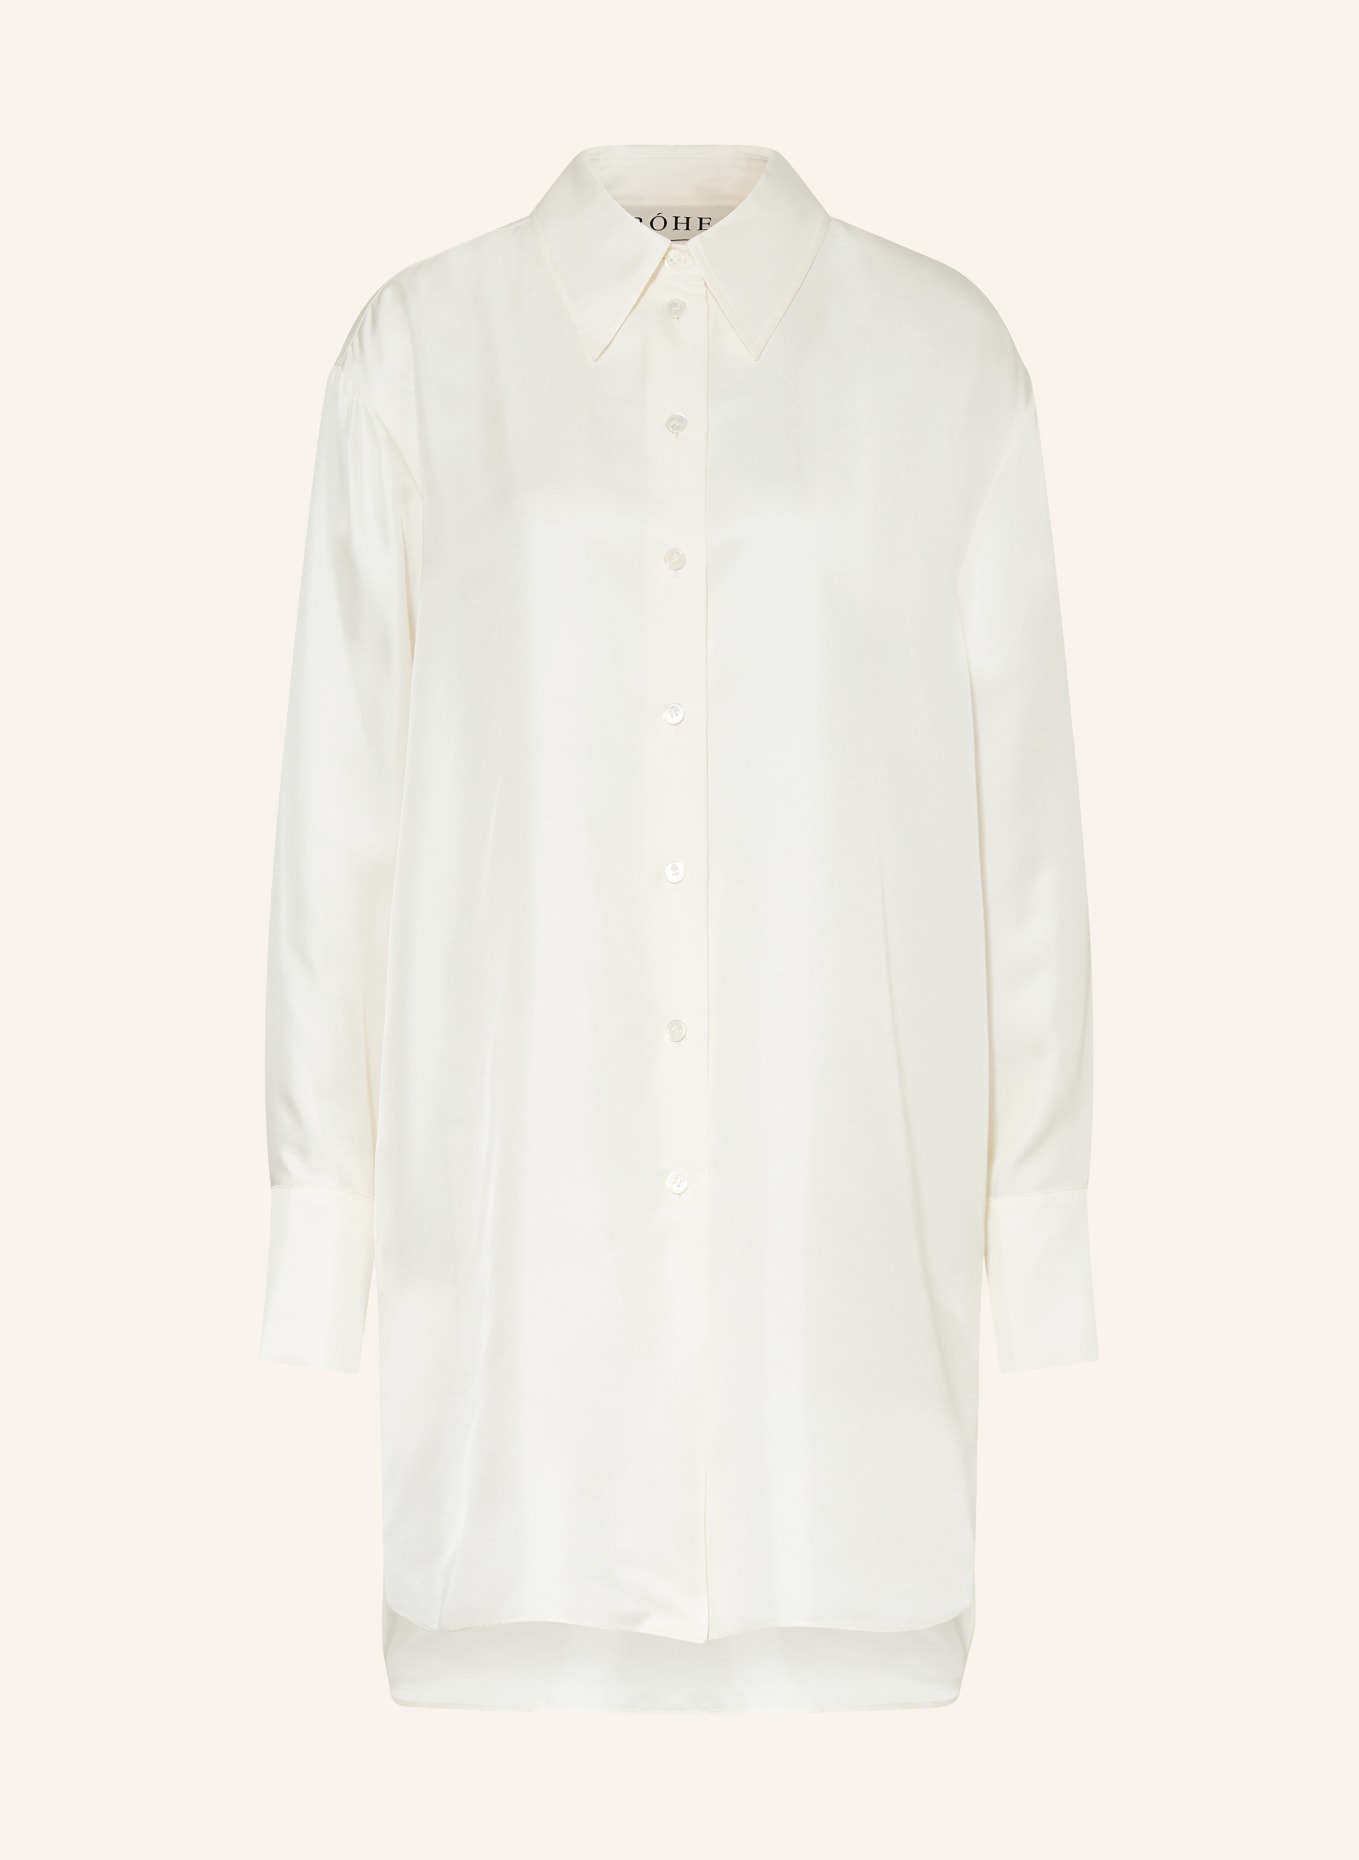 RÓHE Oversized shirt blouse in silk, Color: CREAM (Image 1)